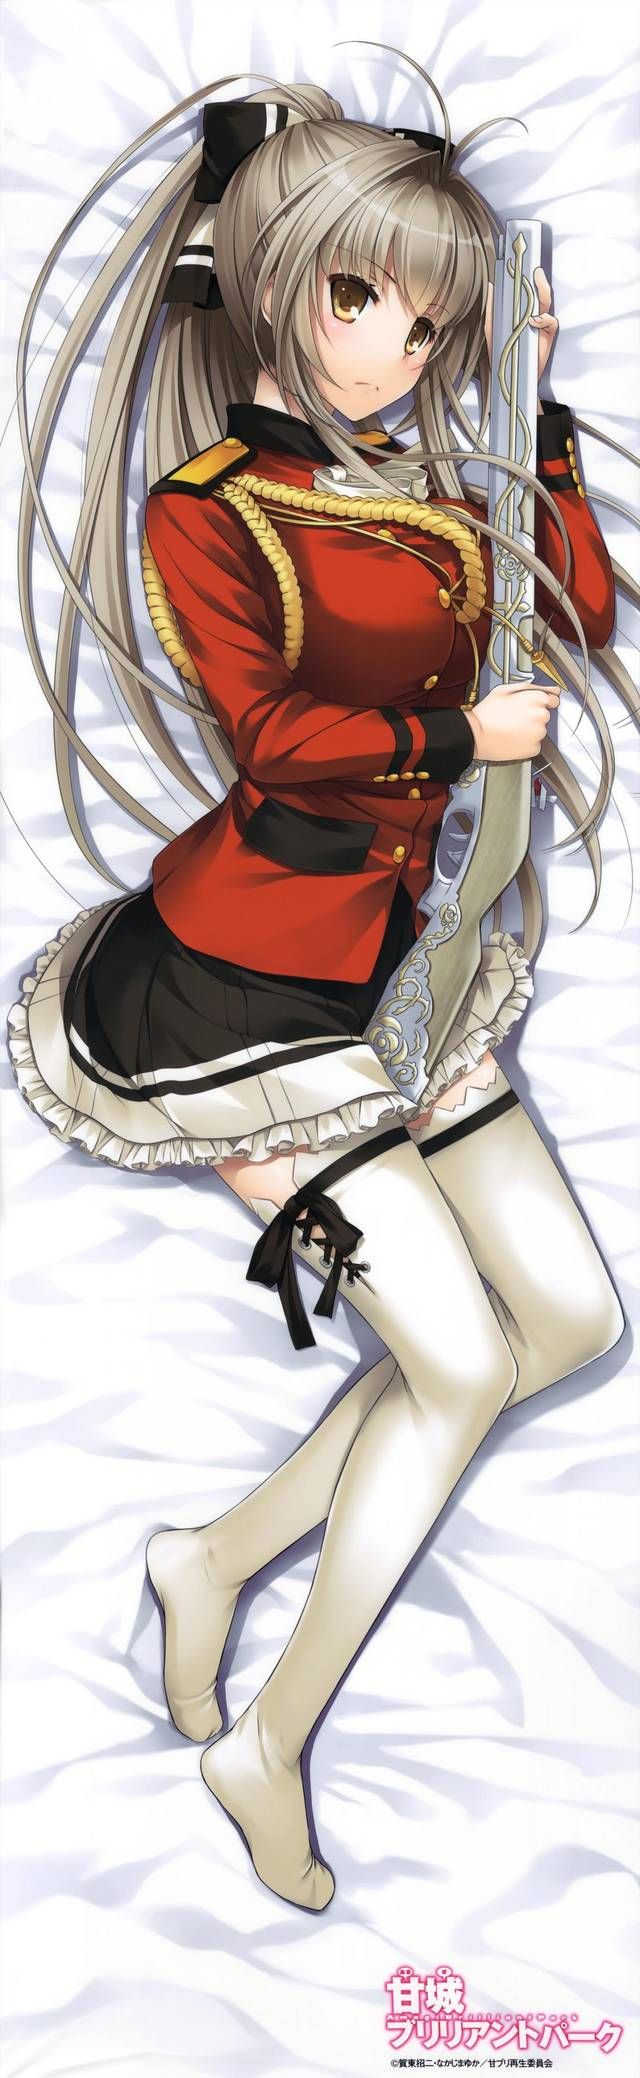 【 99 Images 】 Amagi Brilliant Park secondary erotic image is what you like. 3 [Sweet Yellowtail] 38